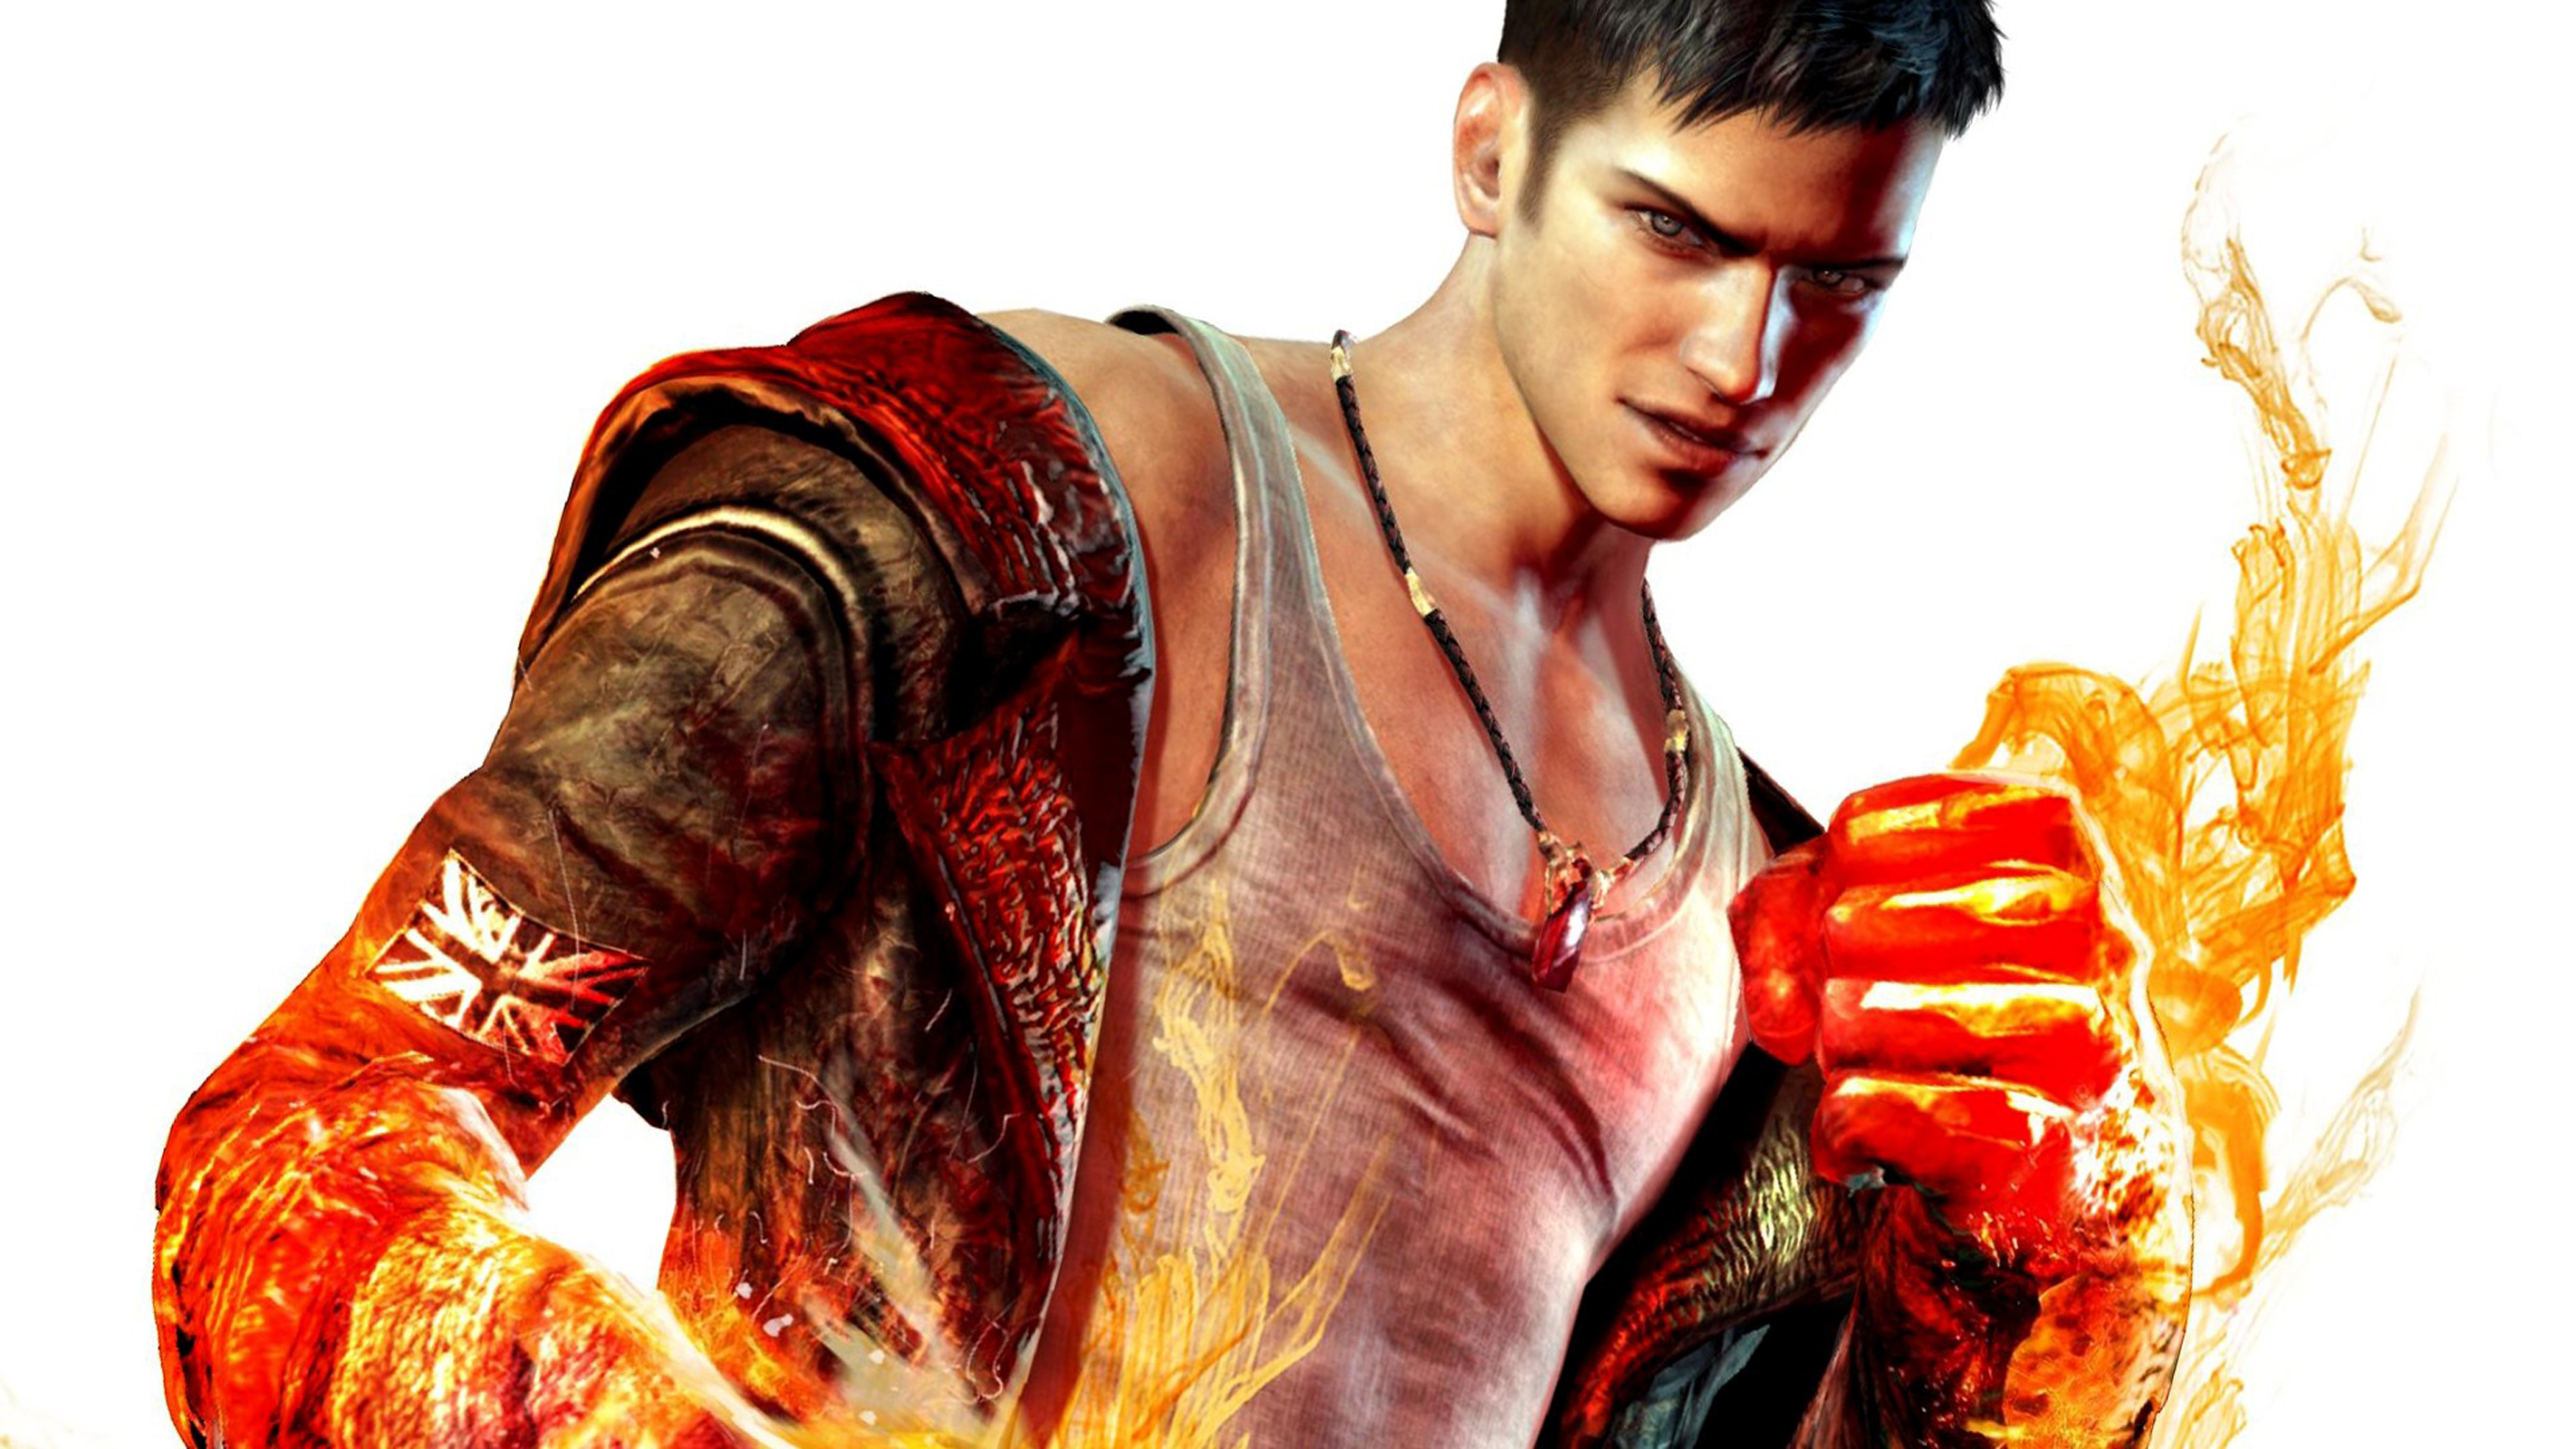 Devil may cry game. Данте Devil May Cry 2013. Данте Devil May Cry 5. DMC Devil May Cry Dante 2013. Данте ДМС 3.